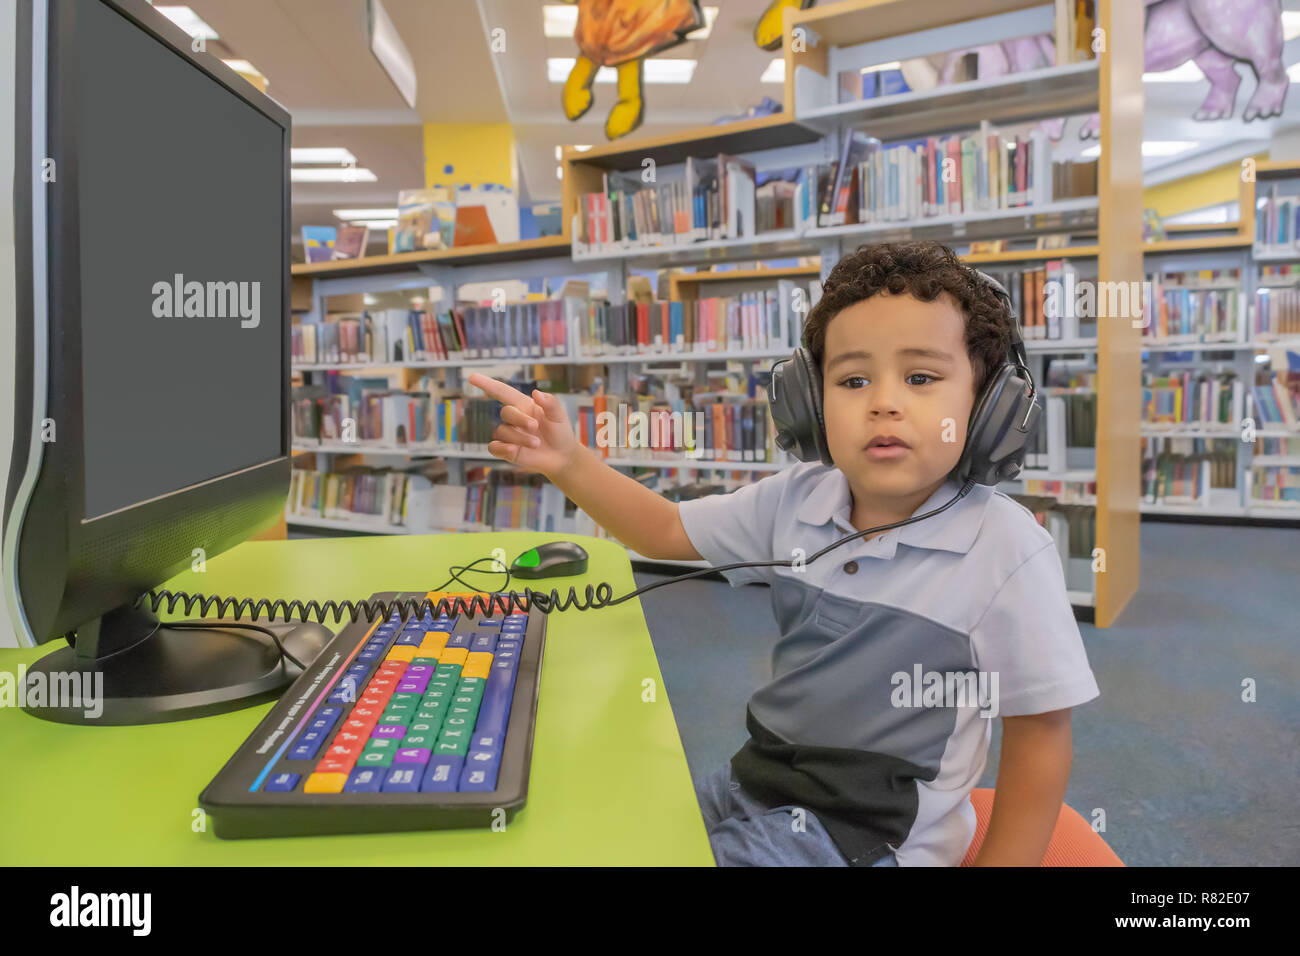 A small boy sits at a desk with headphones pointing at the computer screen. Education at the community public library to learn using the computer. Stock Photo